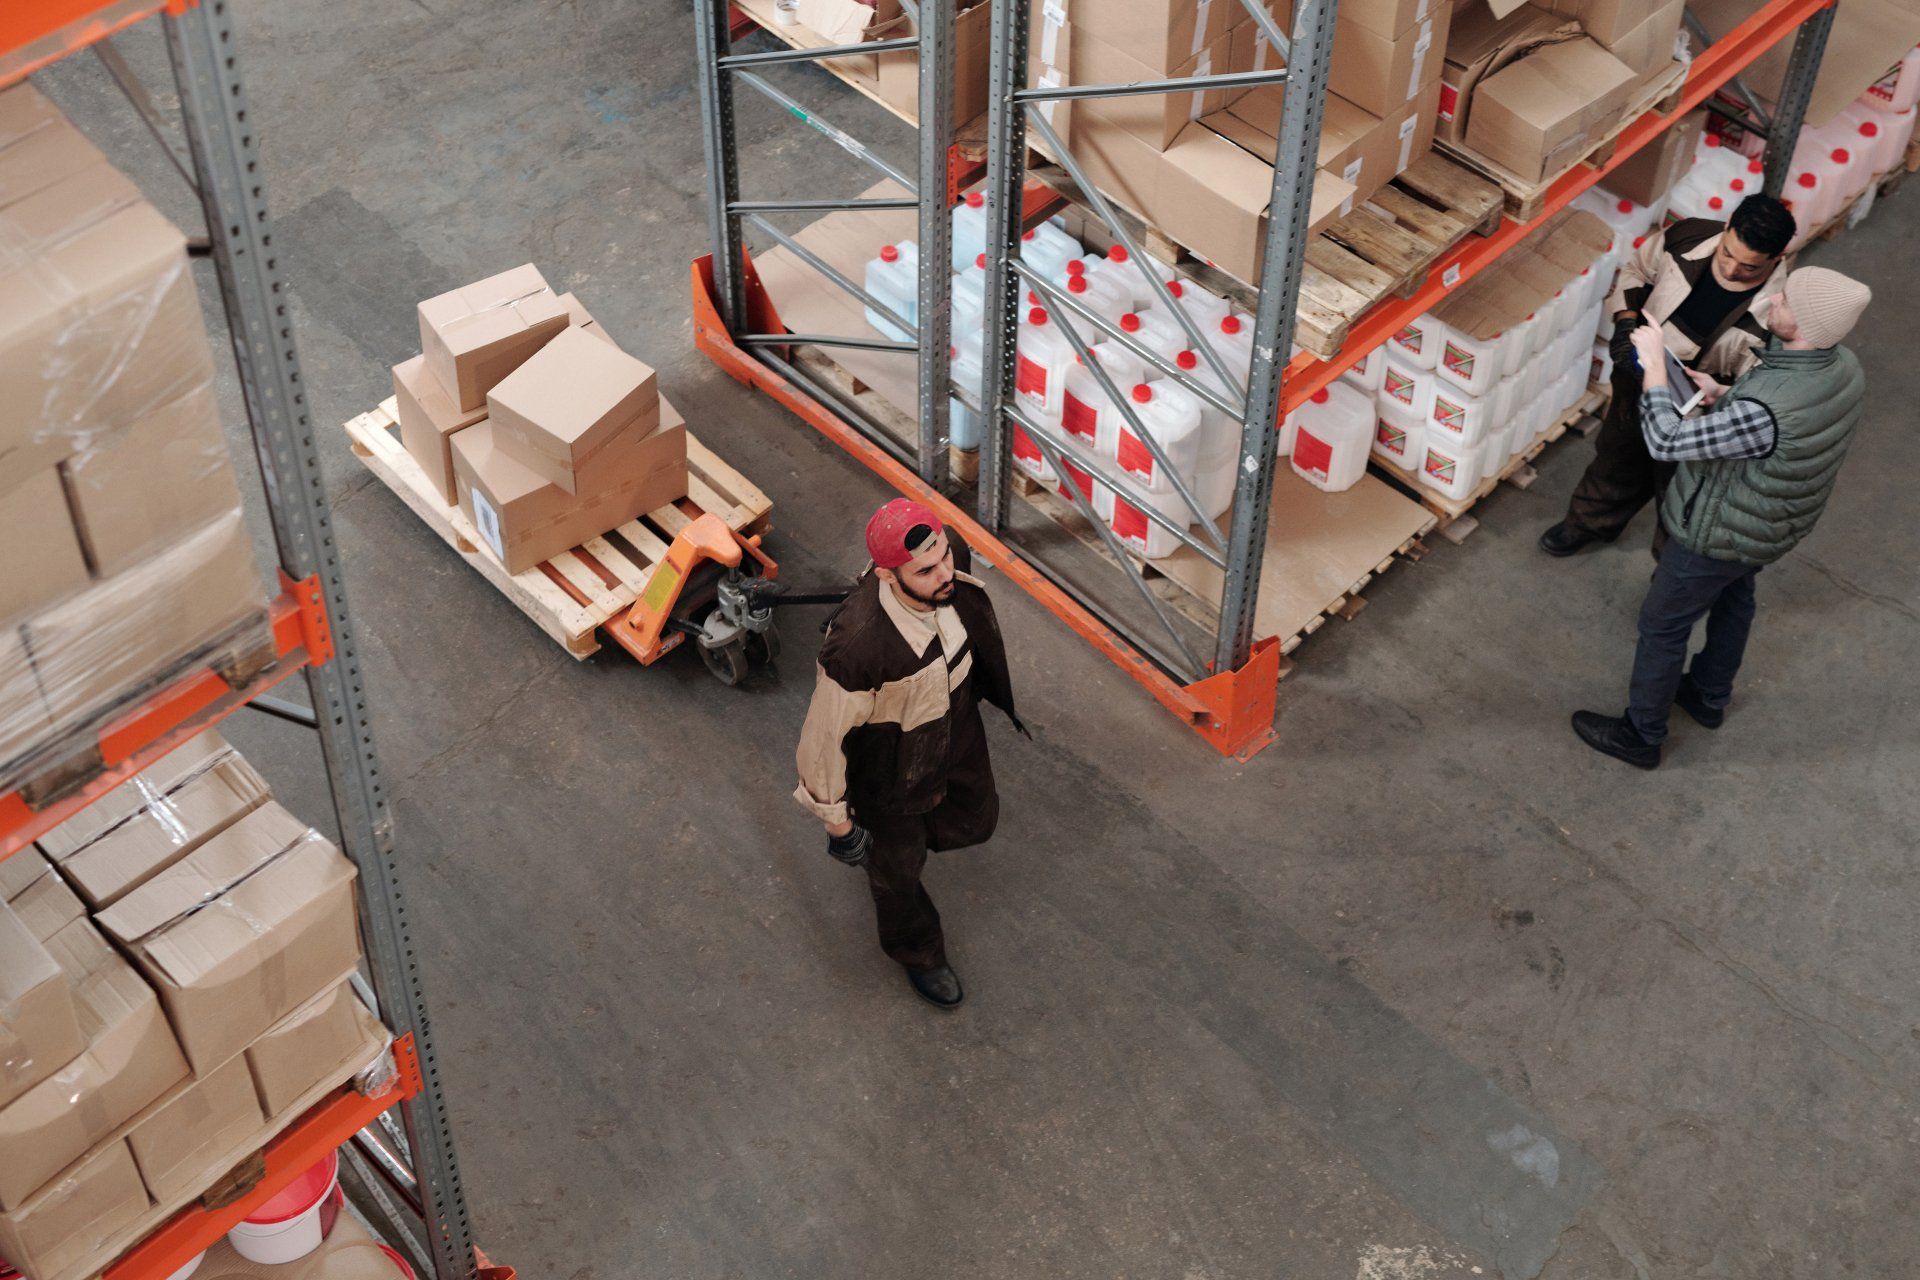 This is an image of a warehouse worker pulling boxes through a warehouse during a physical inventory count.